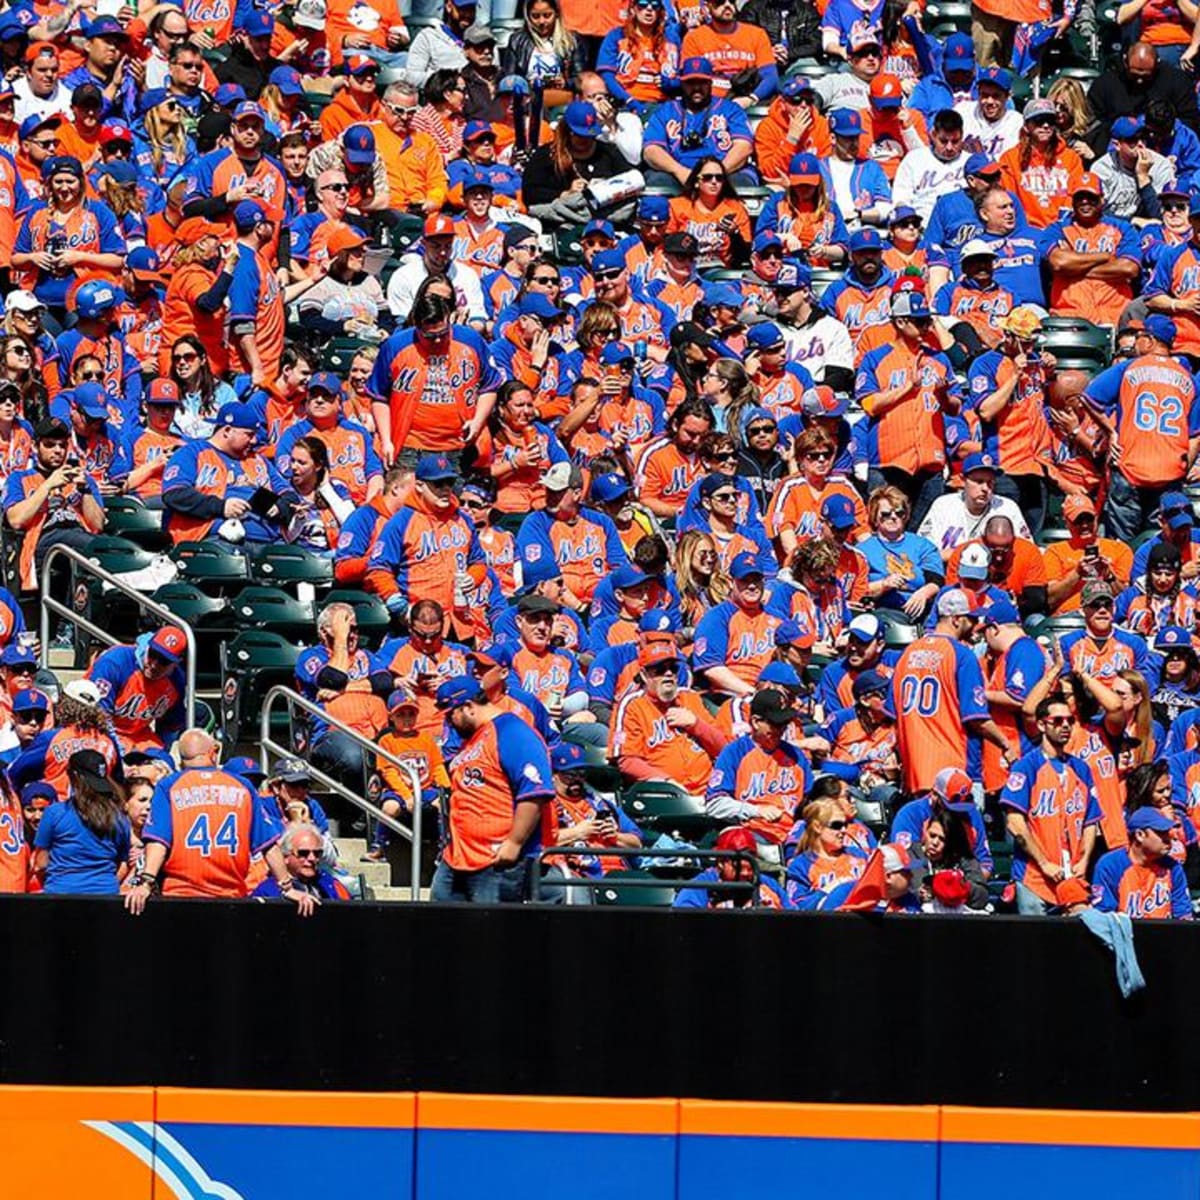 New York Mets: The 7 Line Army separates itself from other MLB fan